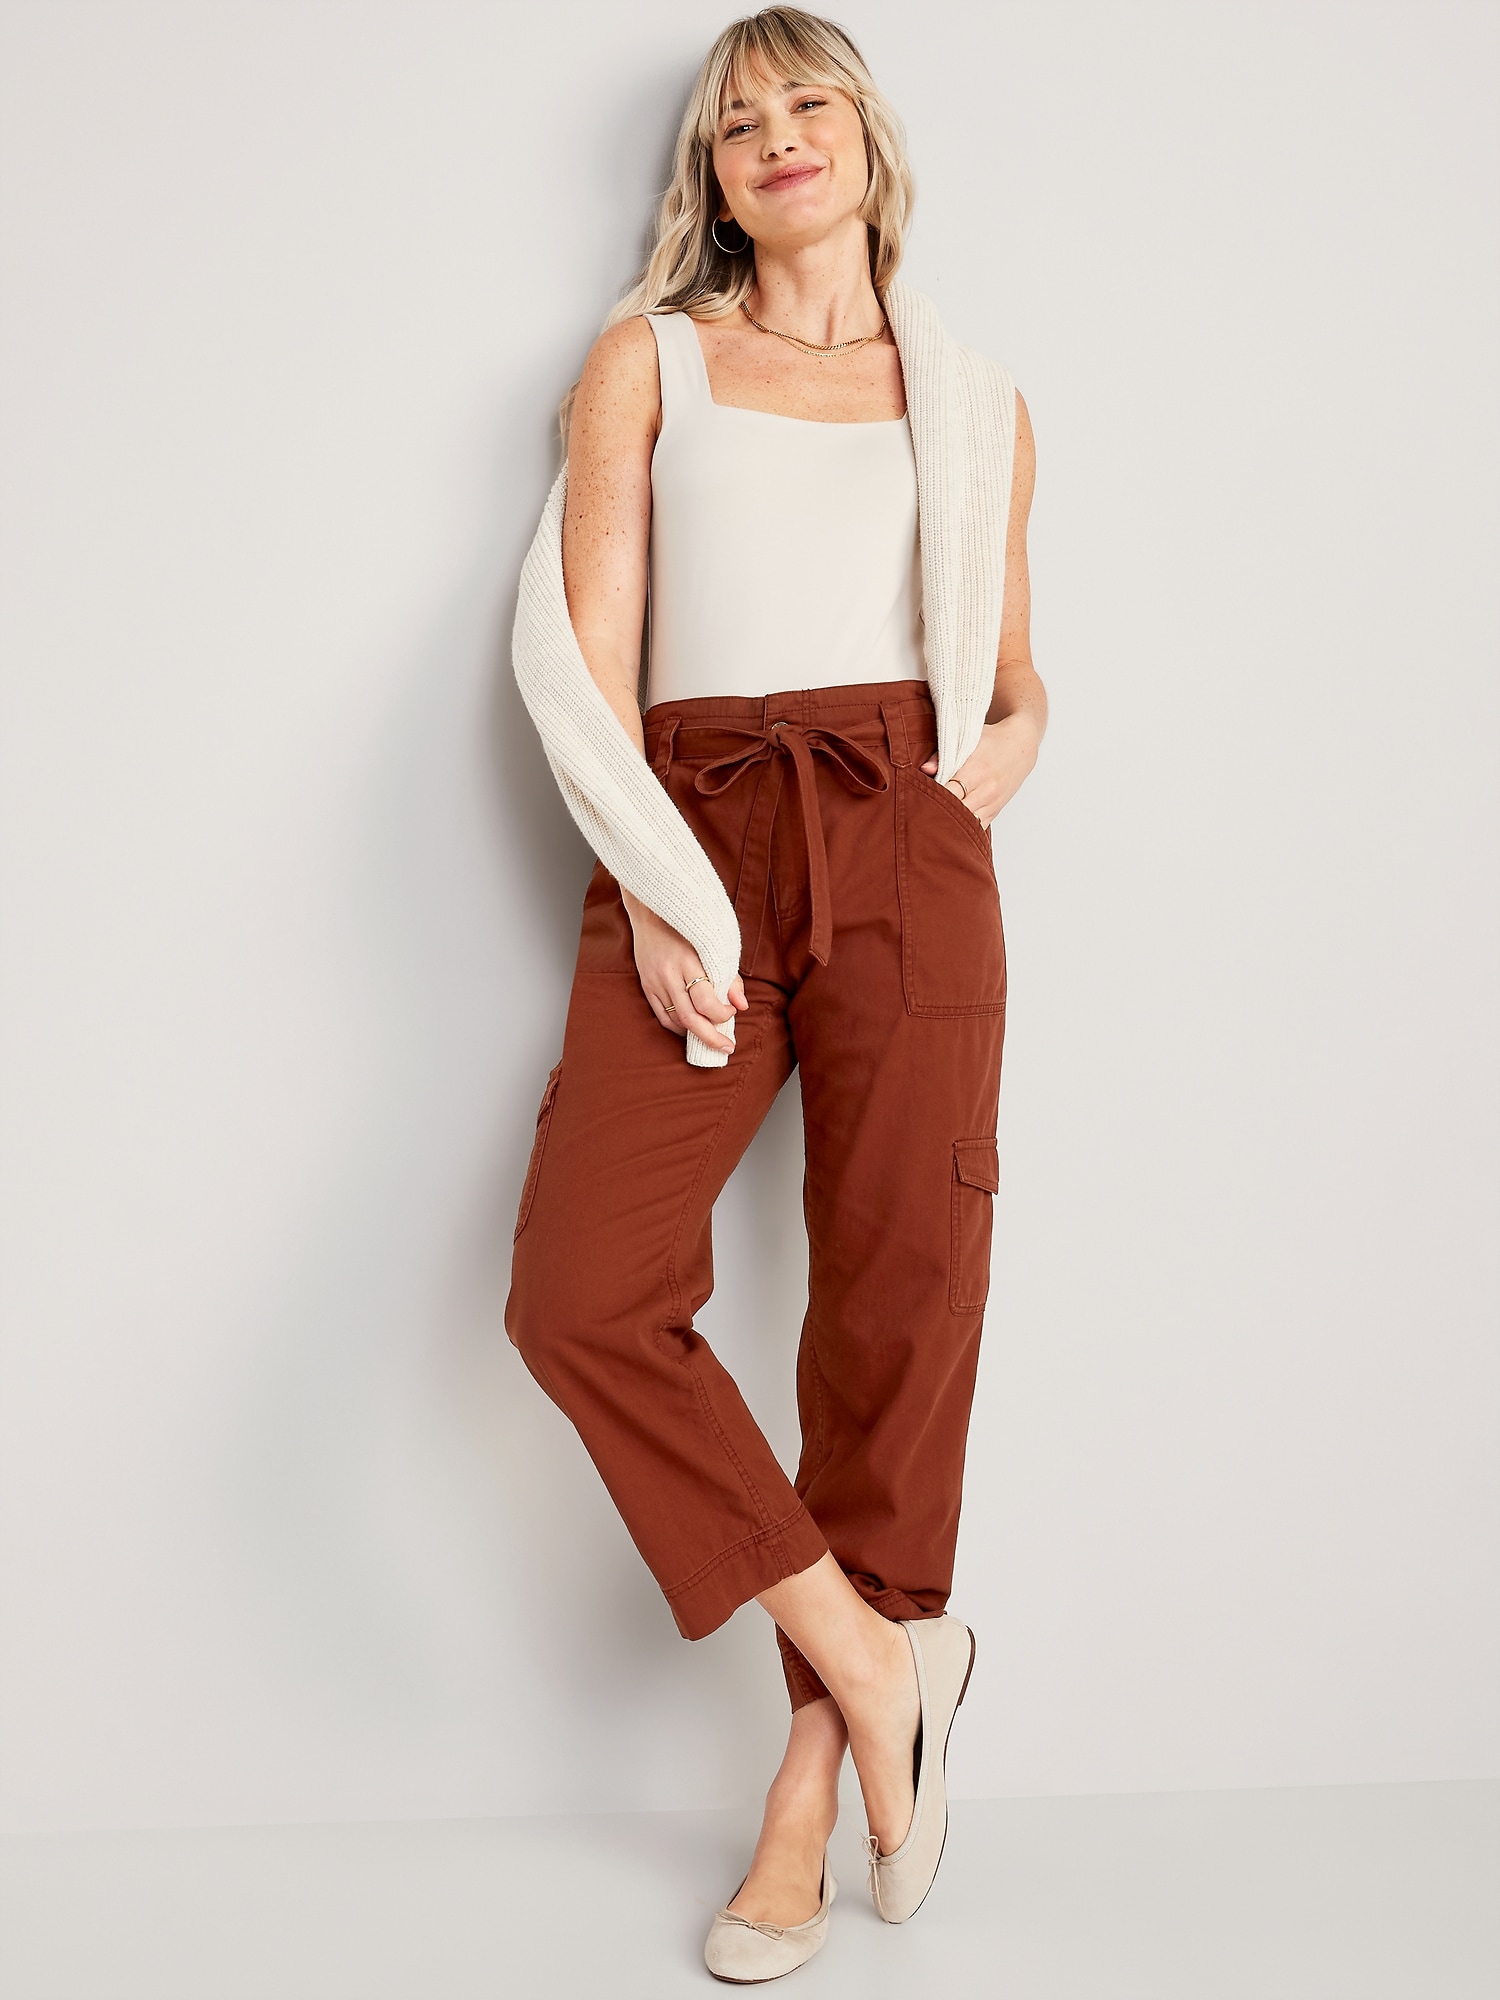 WAIST SNATCHED: Mocha Bandage High Waist Belted Pants – Hot Miami Styles